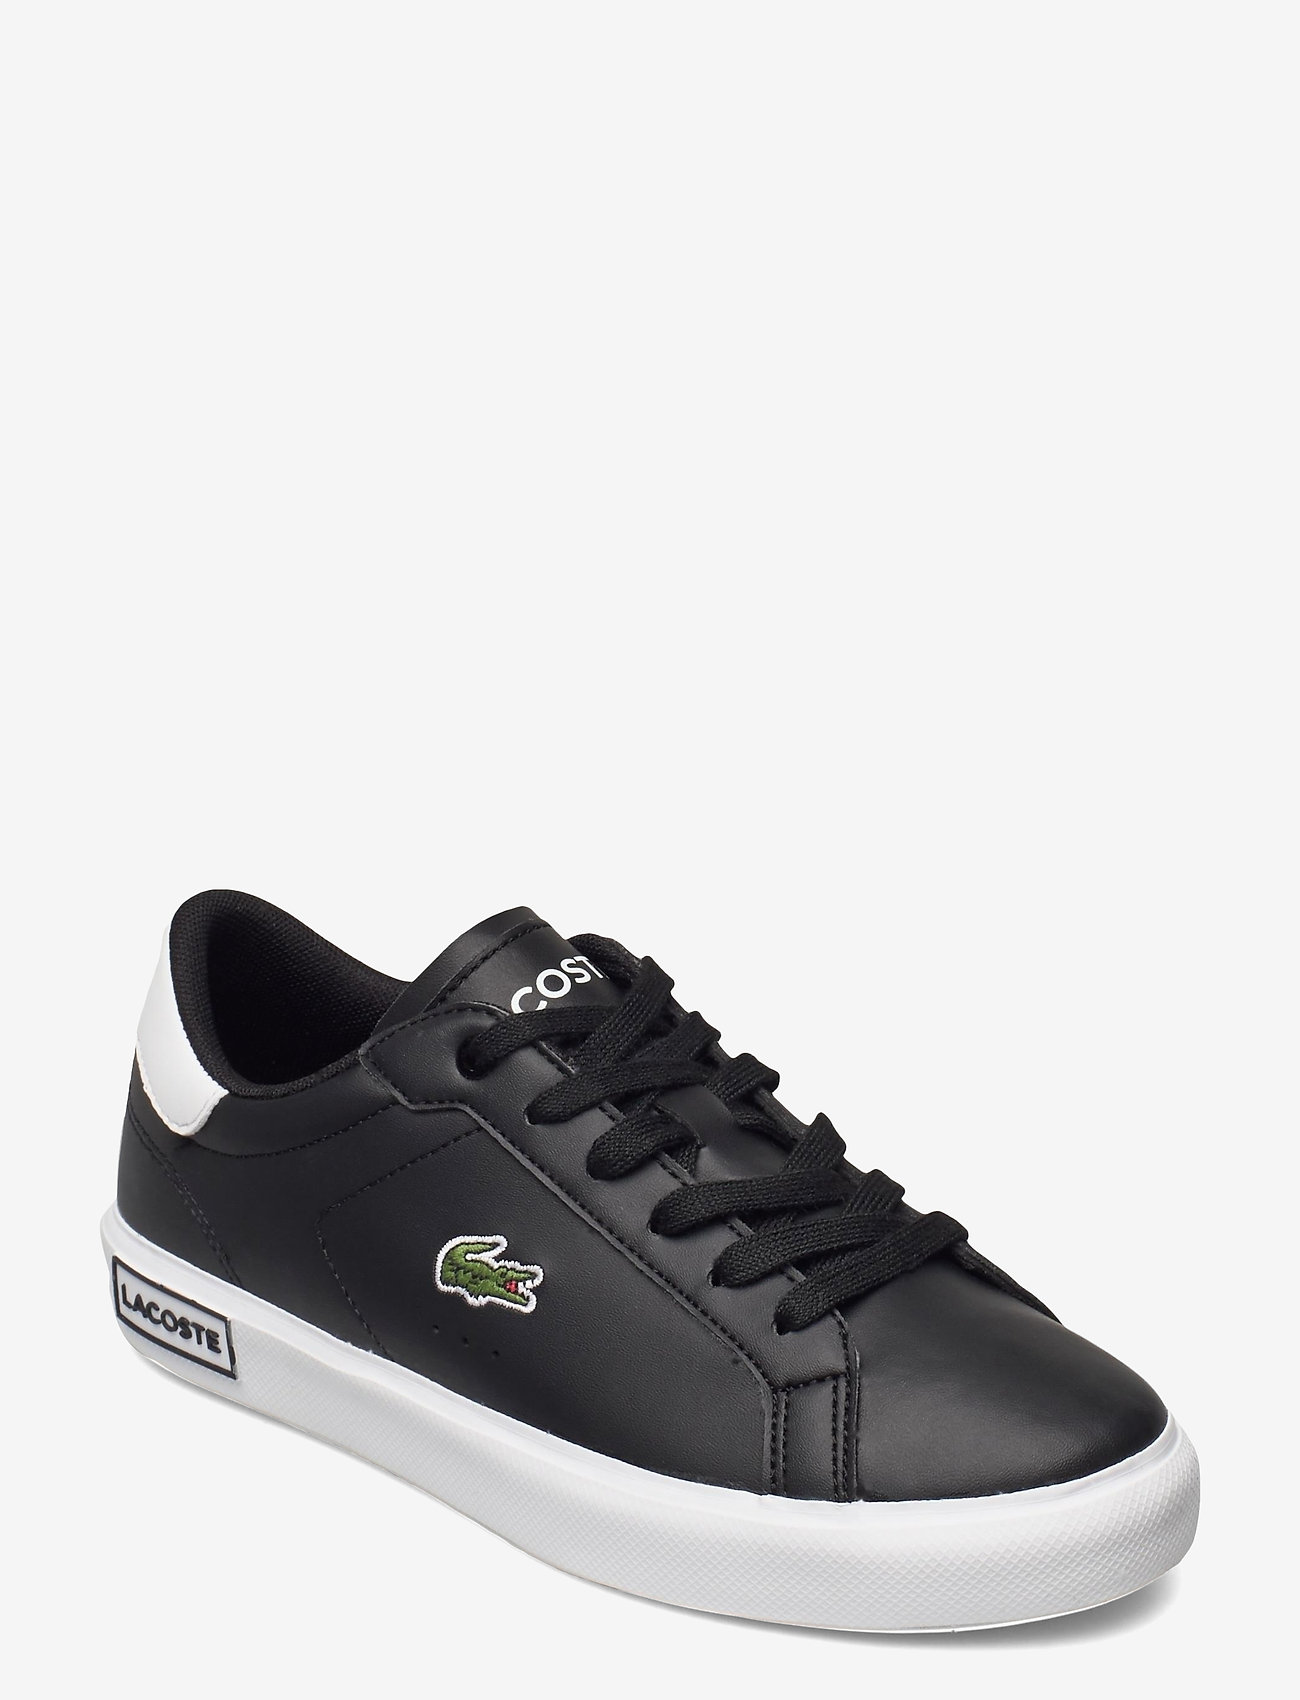 lacoste shoes cost